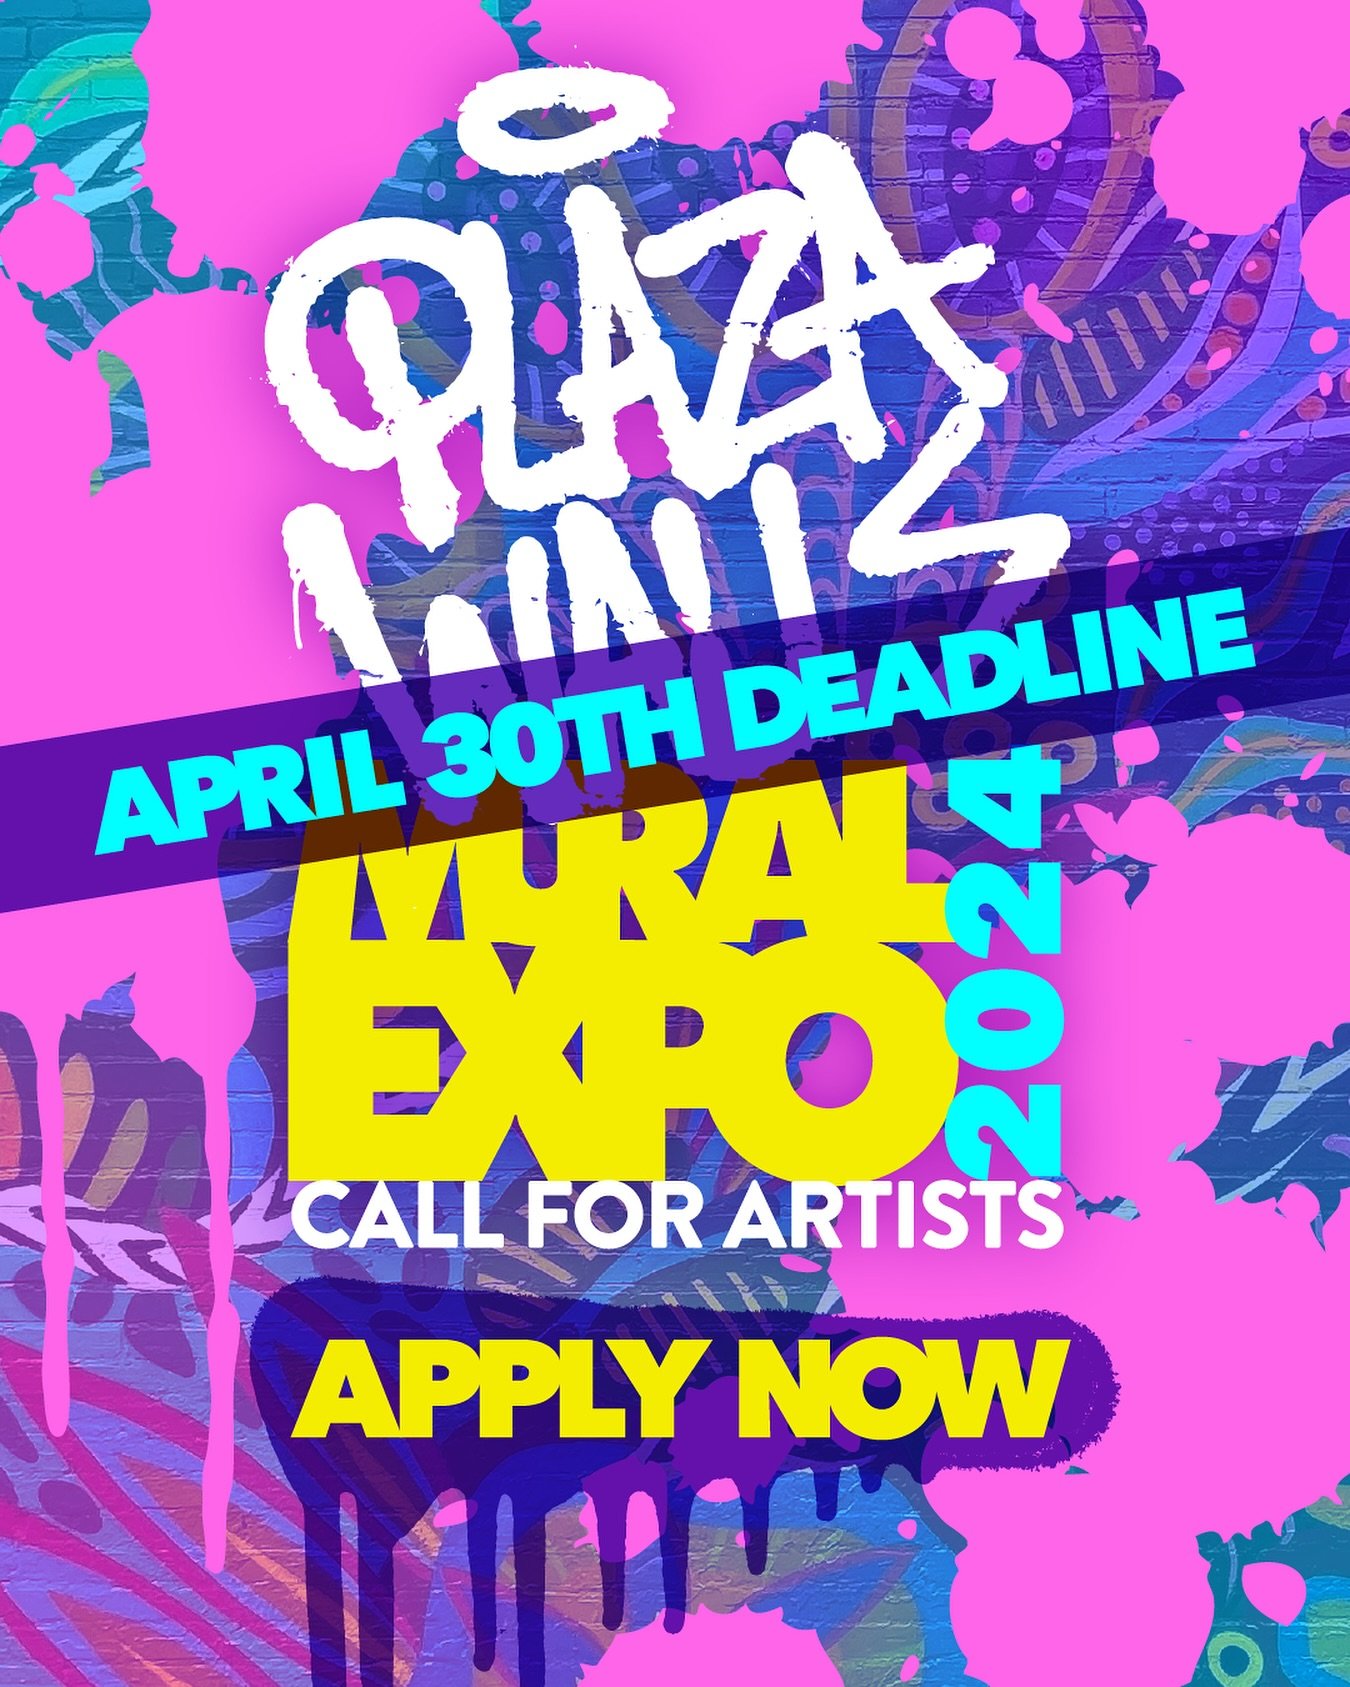 ⏰ APRIL 30TH DEADLINE!!! ⏰
7 DAYS LEFT TO APPLY FOR THE 2024 MURAL EXPO!!!

Artists, ready to make your mark at Plaza Walls? 🎨💪 Applications are NOW OPEN - LINK IN BIO 💥 APPLY SOON the application WILL CLOSE APRIL 30th at midnight!!!

Join us as w